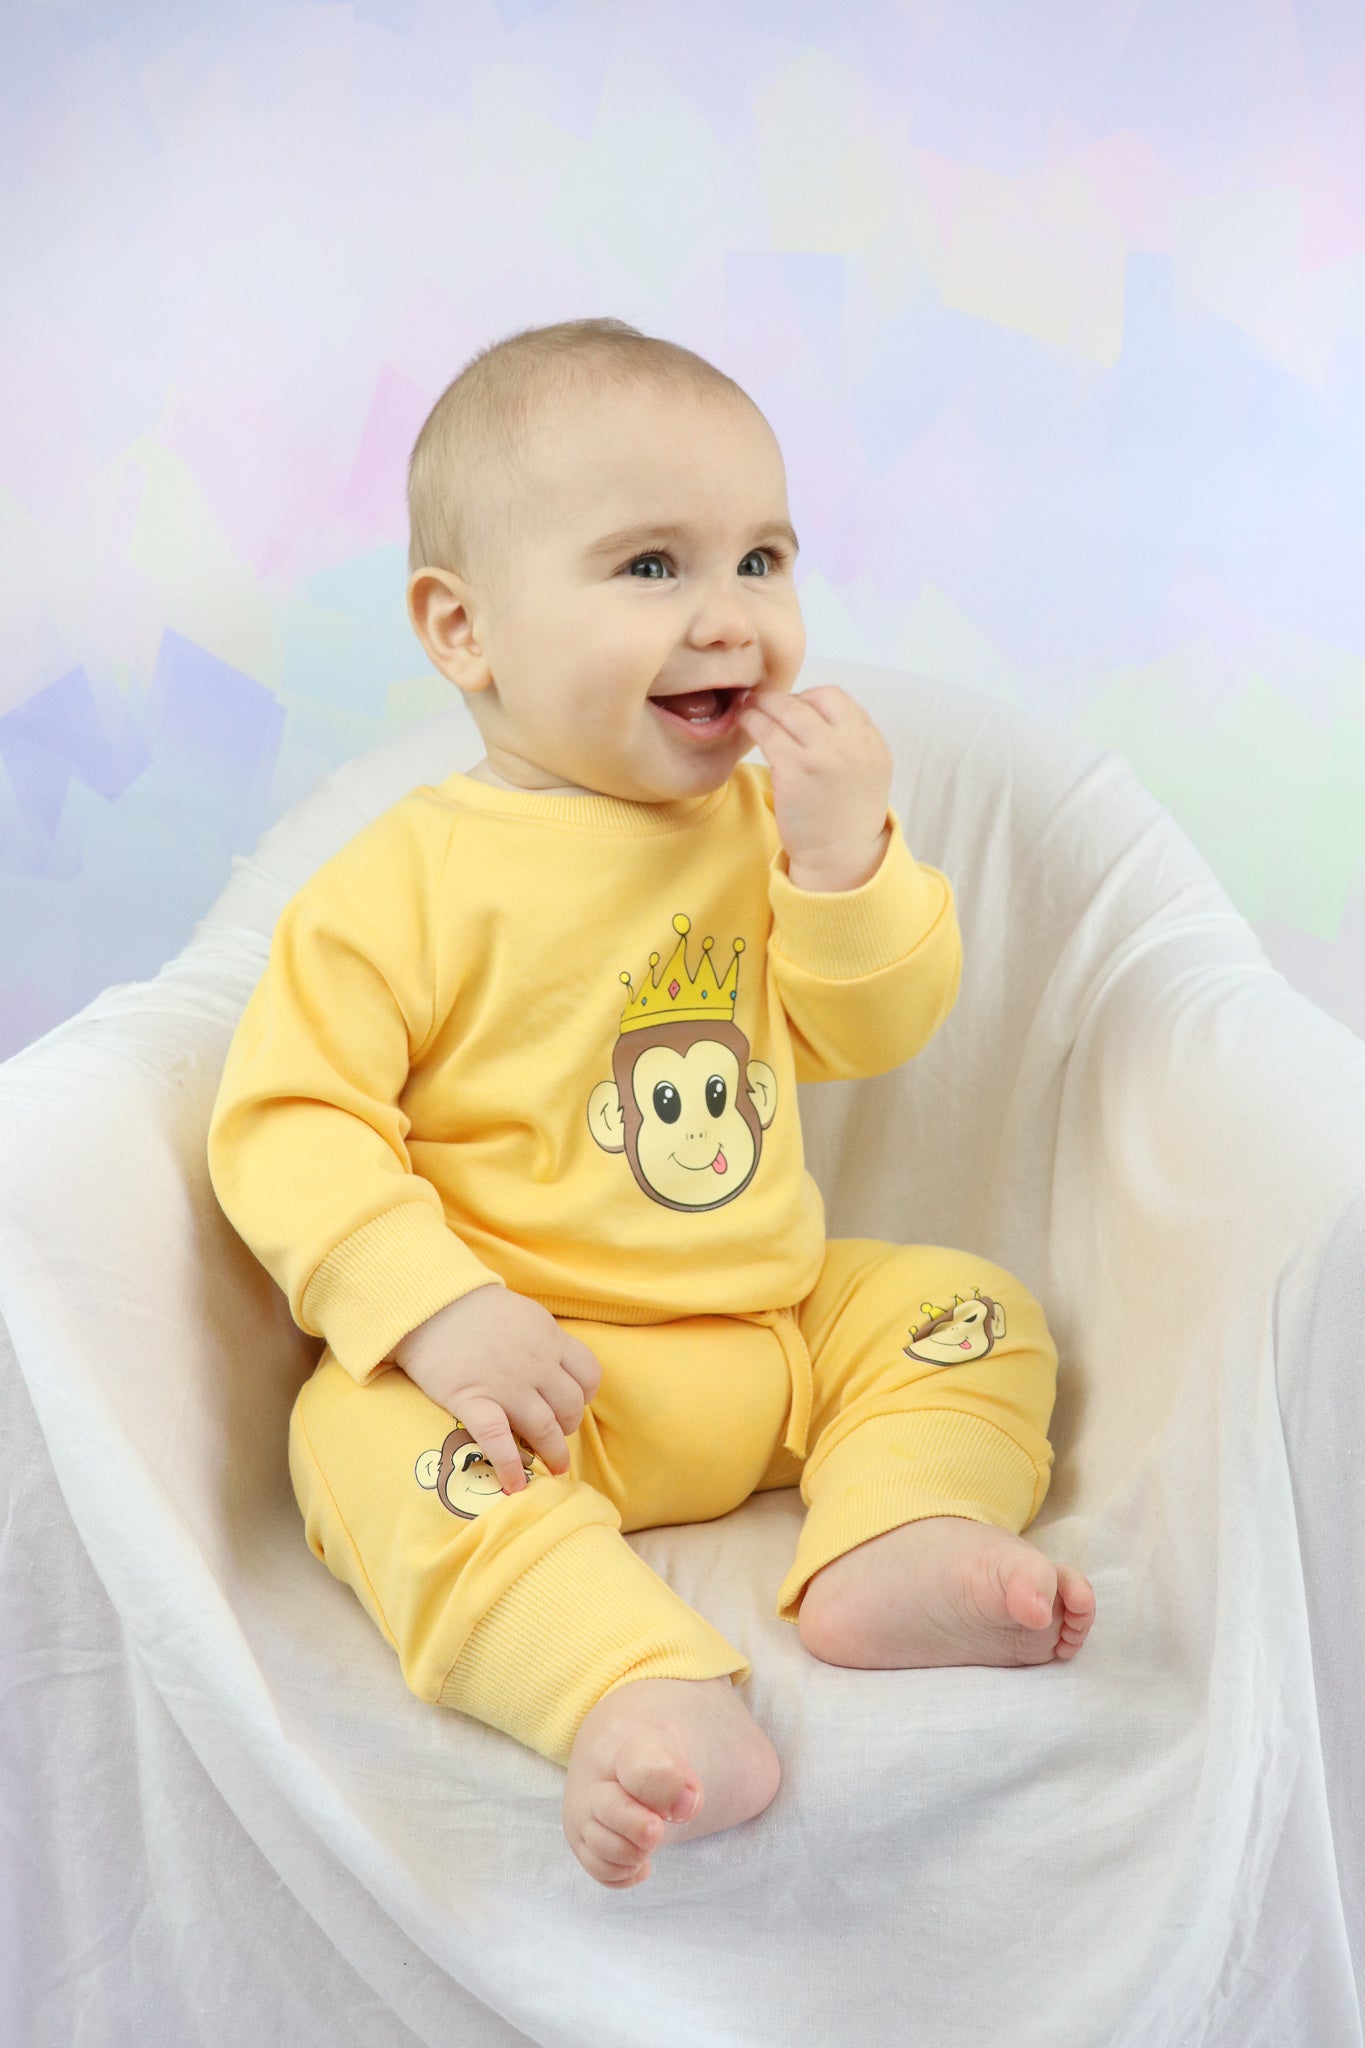 baby boy sitting down and smiling. Wearing a pastel orange lounge set with cute monkey faces printed on it